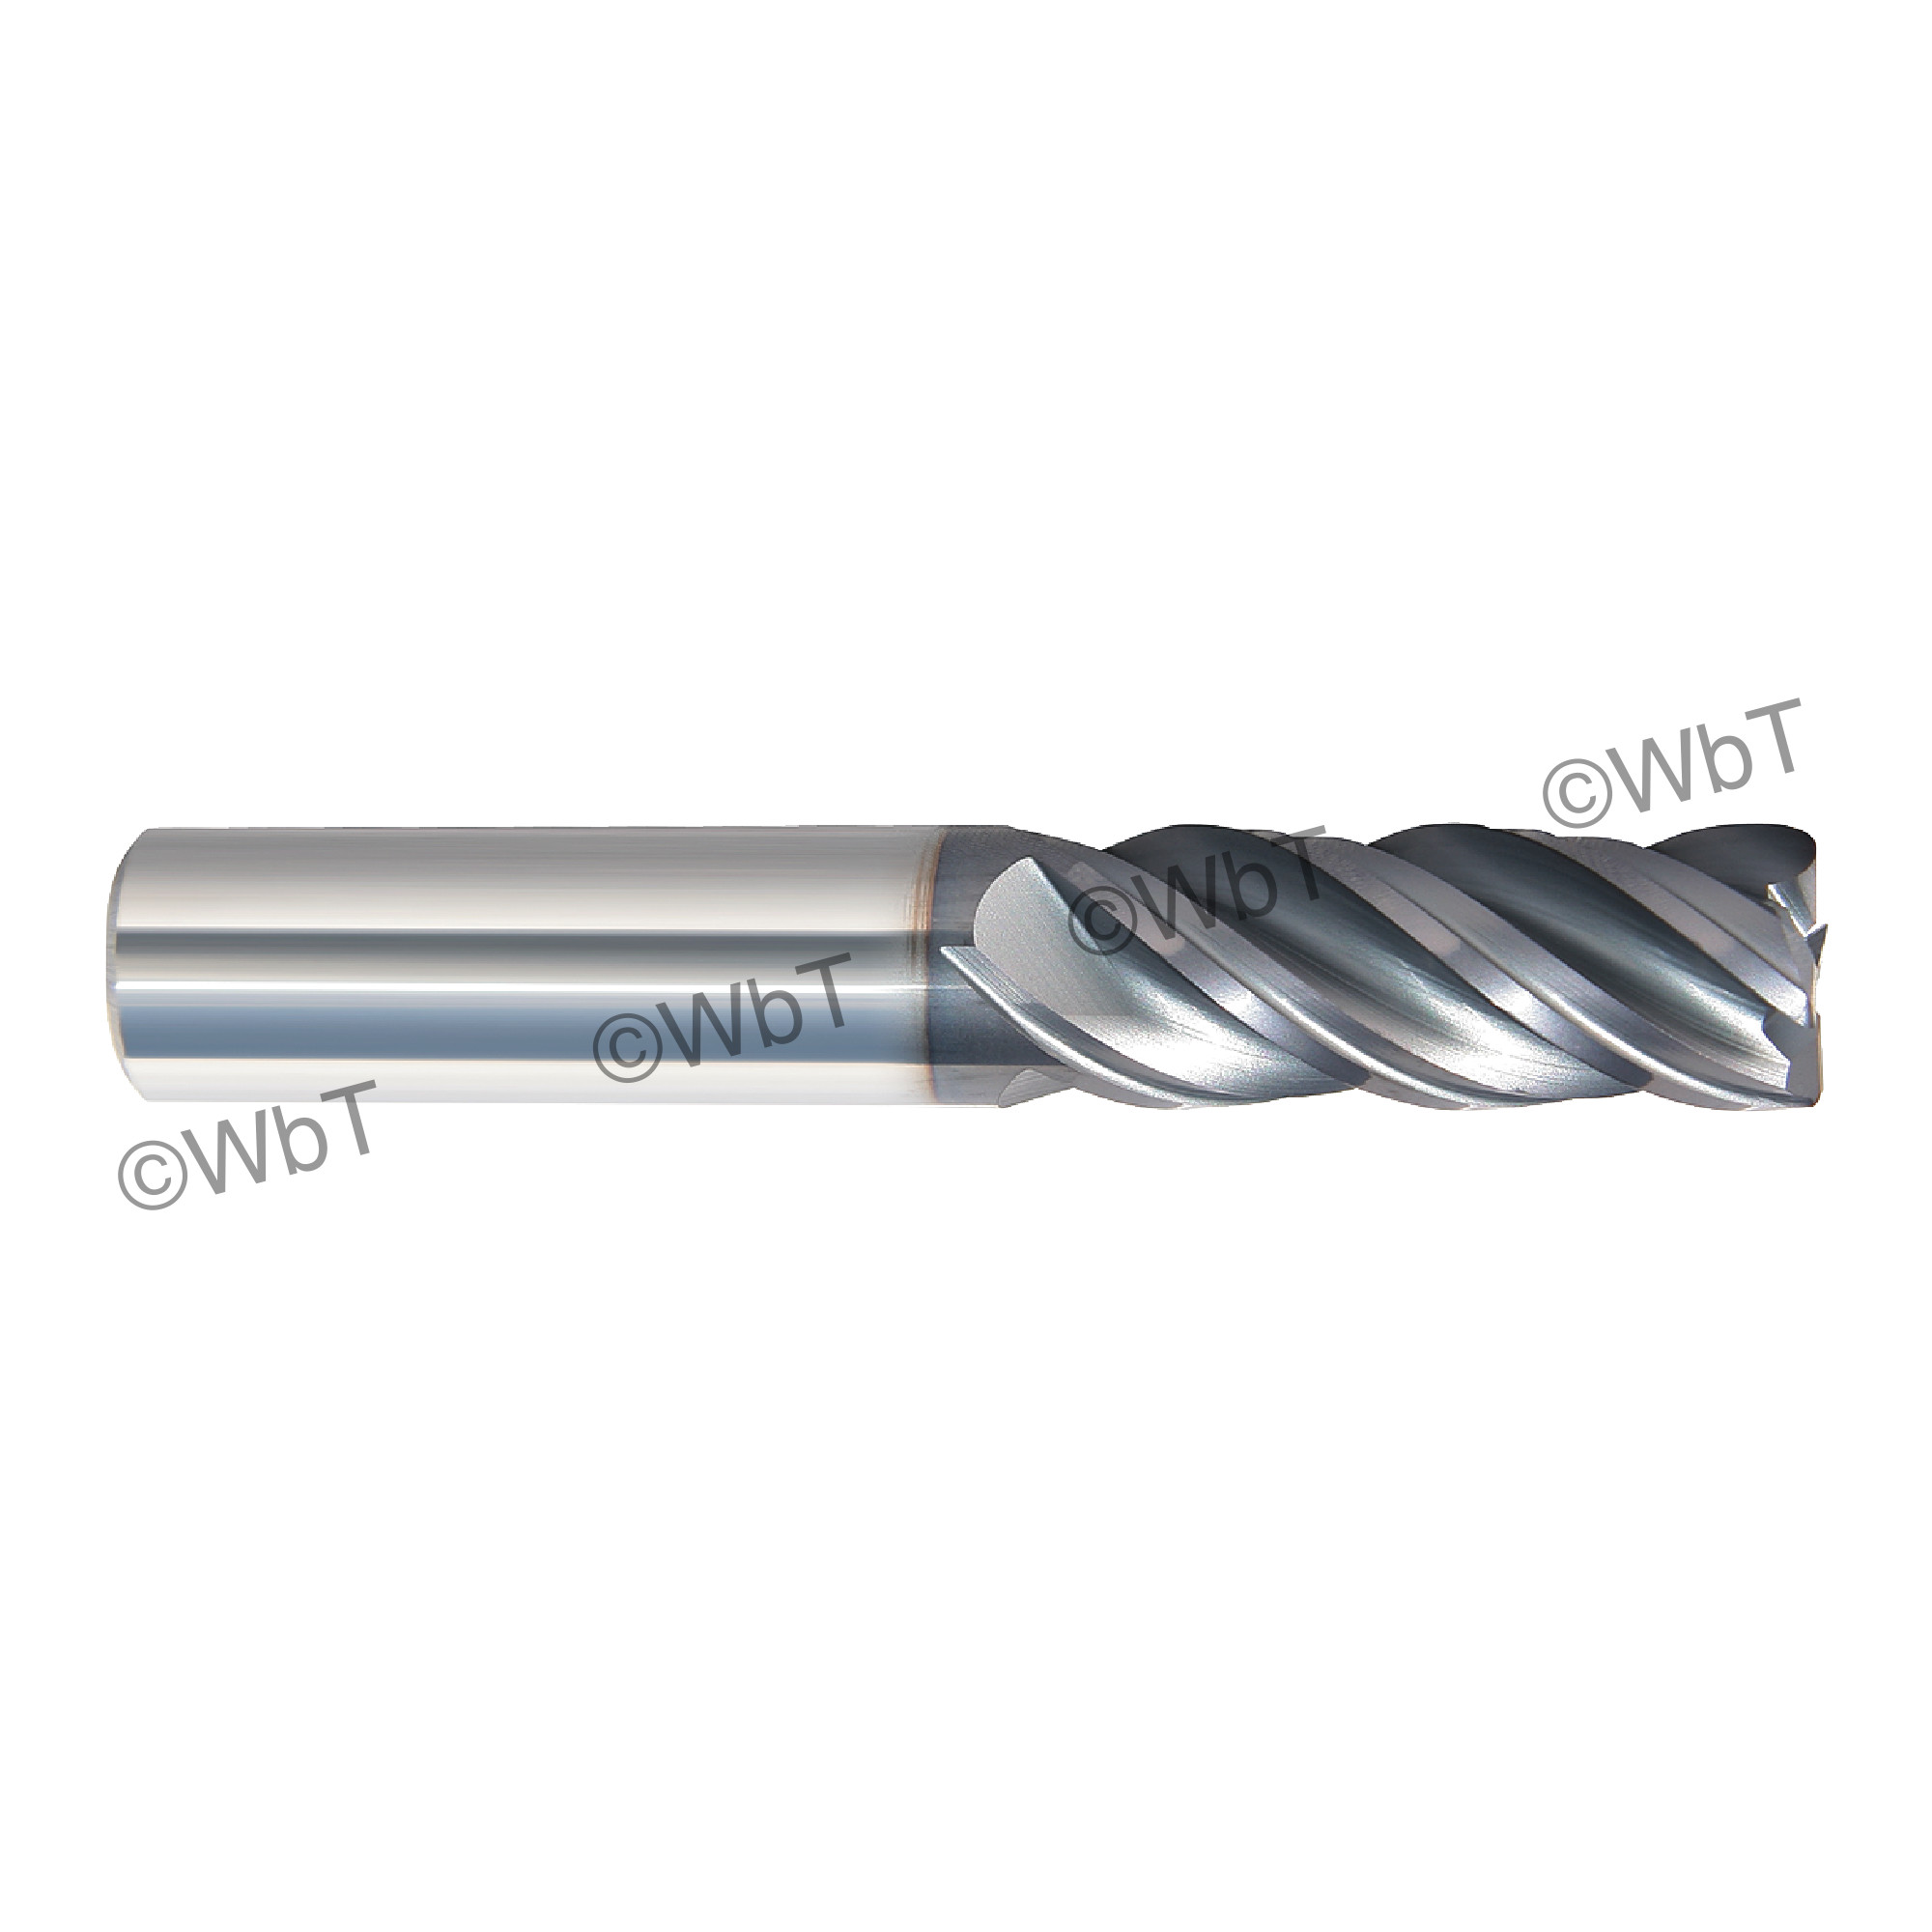 Rushmore USA 3/4" x 1-1/2" Flute Solid Carbide Variable Helix Unequal Index AlTiN Coated Corner Radius 4 Flute Roughing 